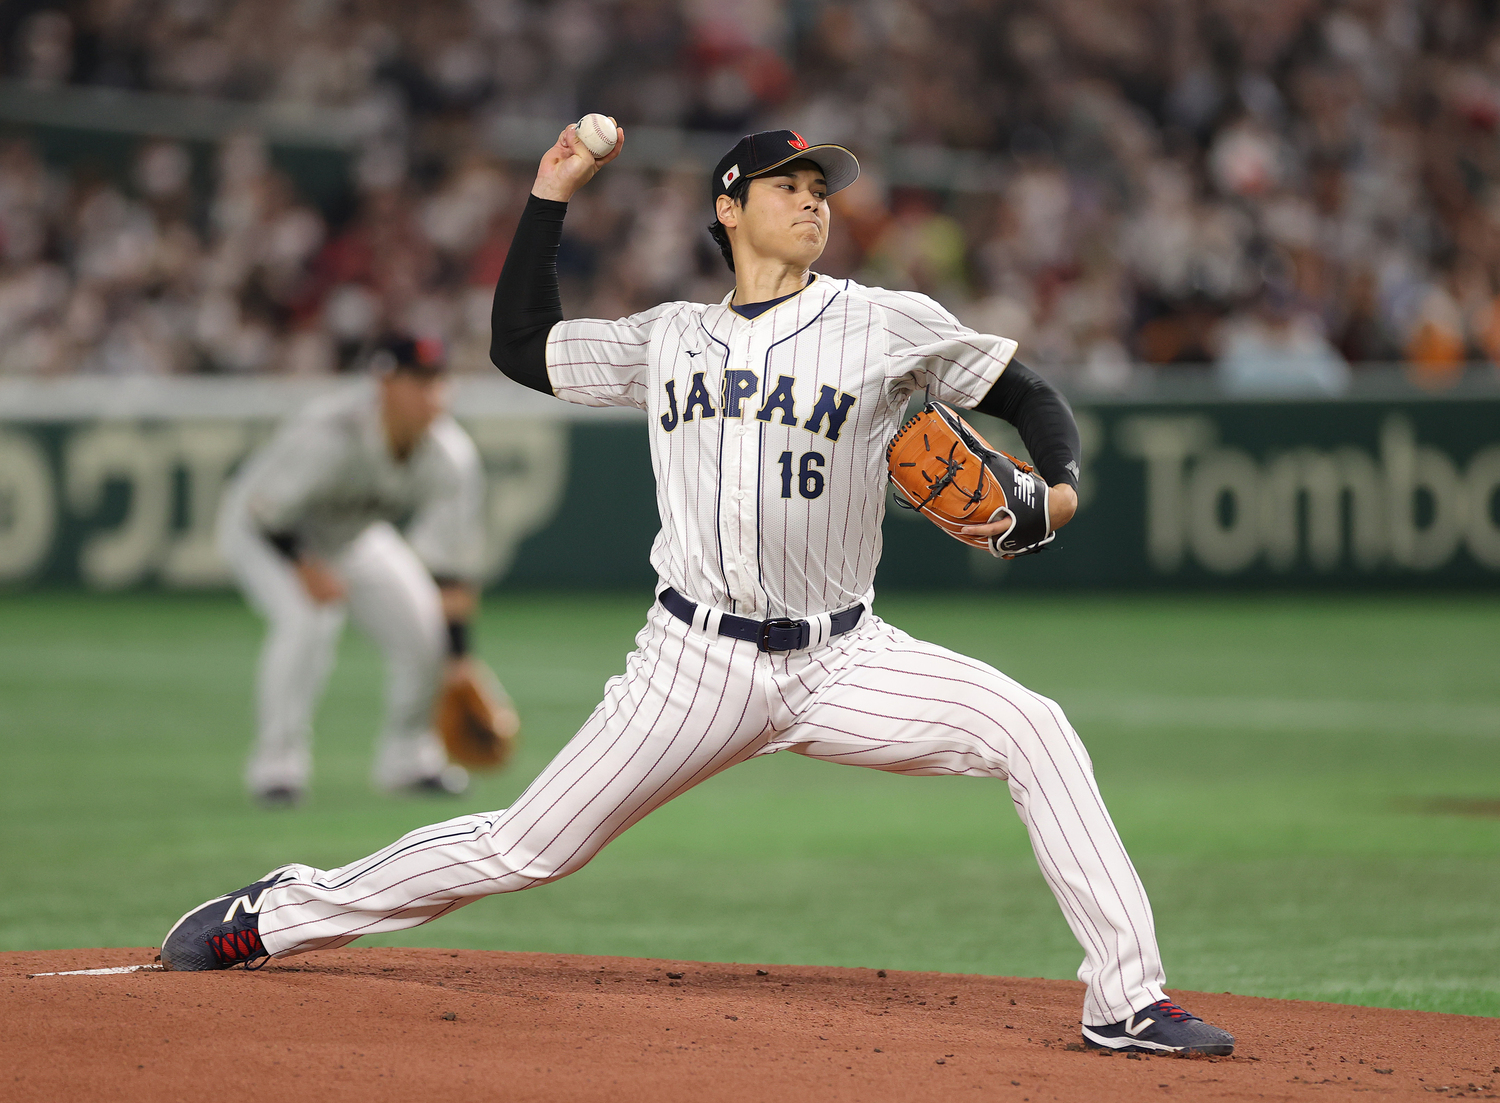 Productivo Microprocesador Instalar en pc Shohei Ohtani Shines as Japan Opens WBC with a Hard-Fought Win over China |  SportsLook